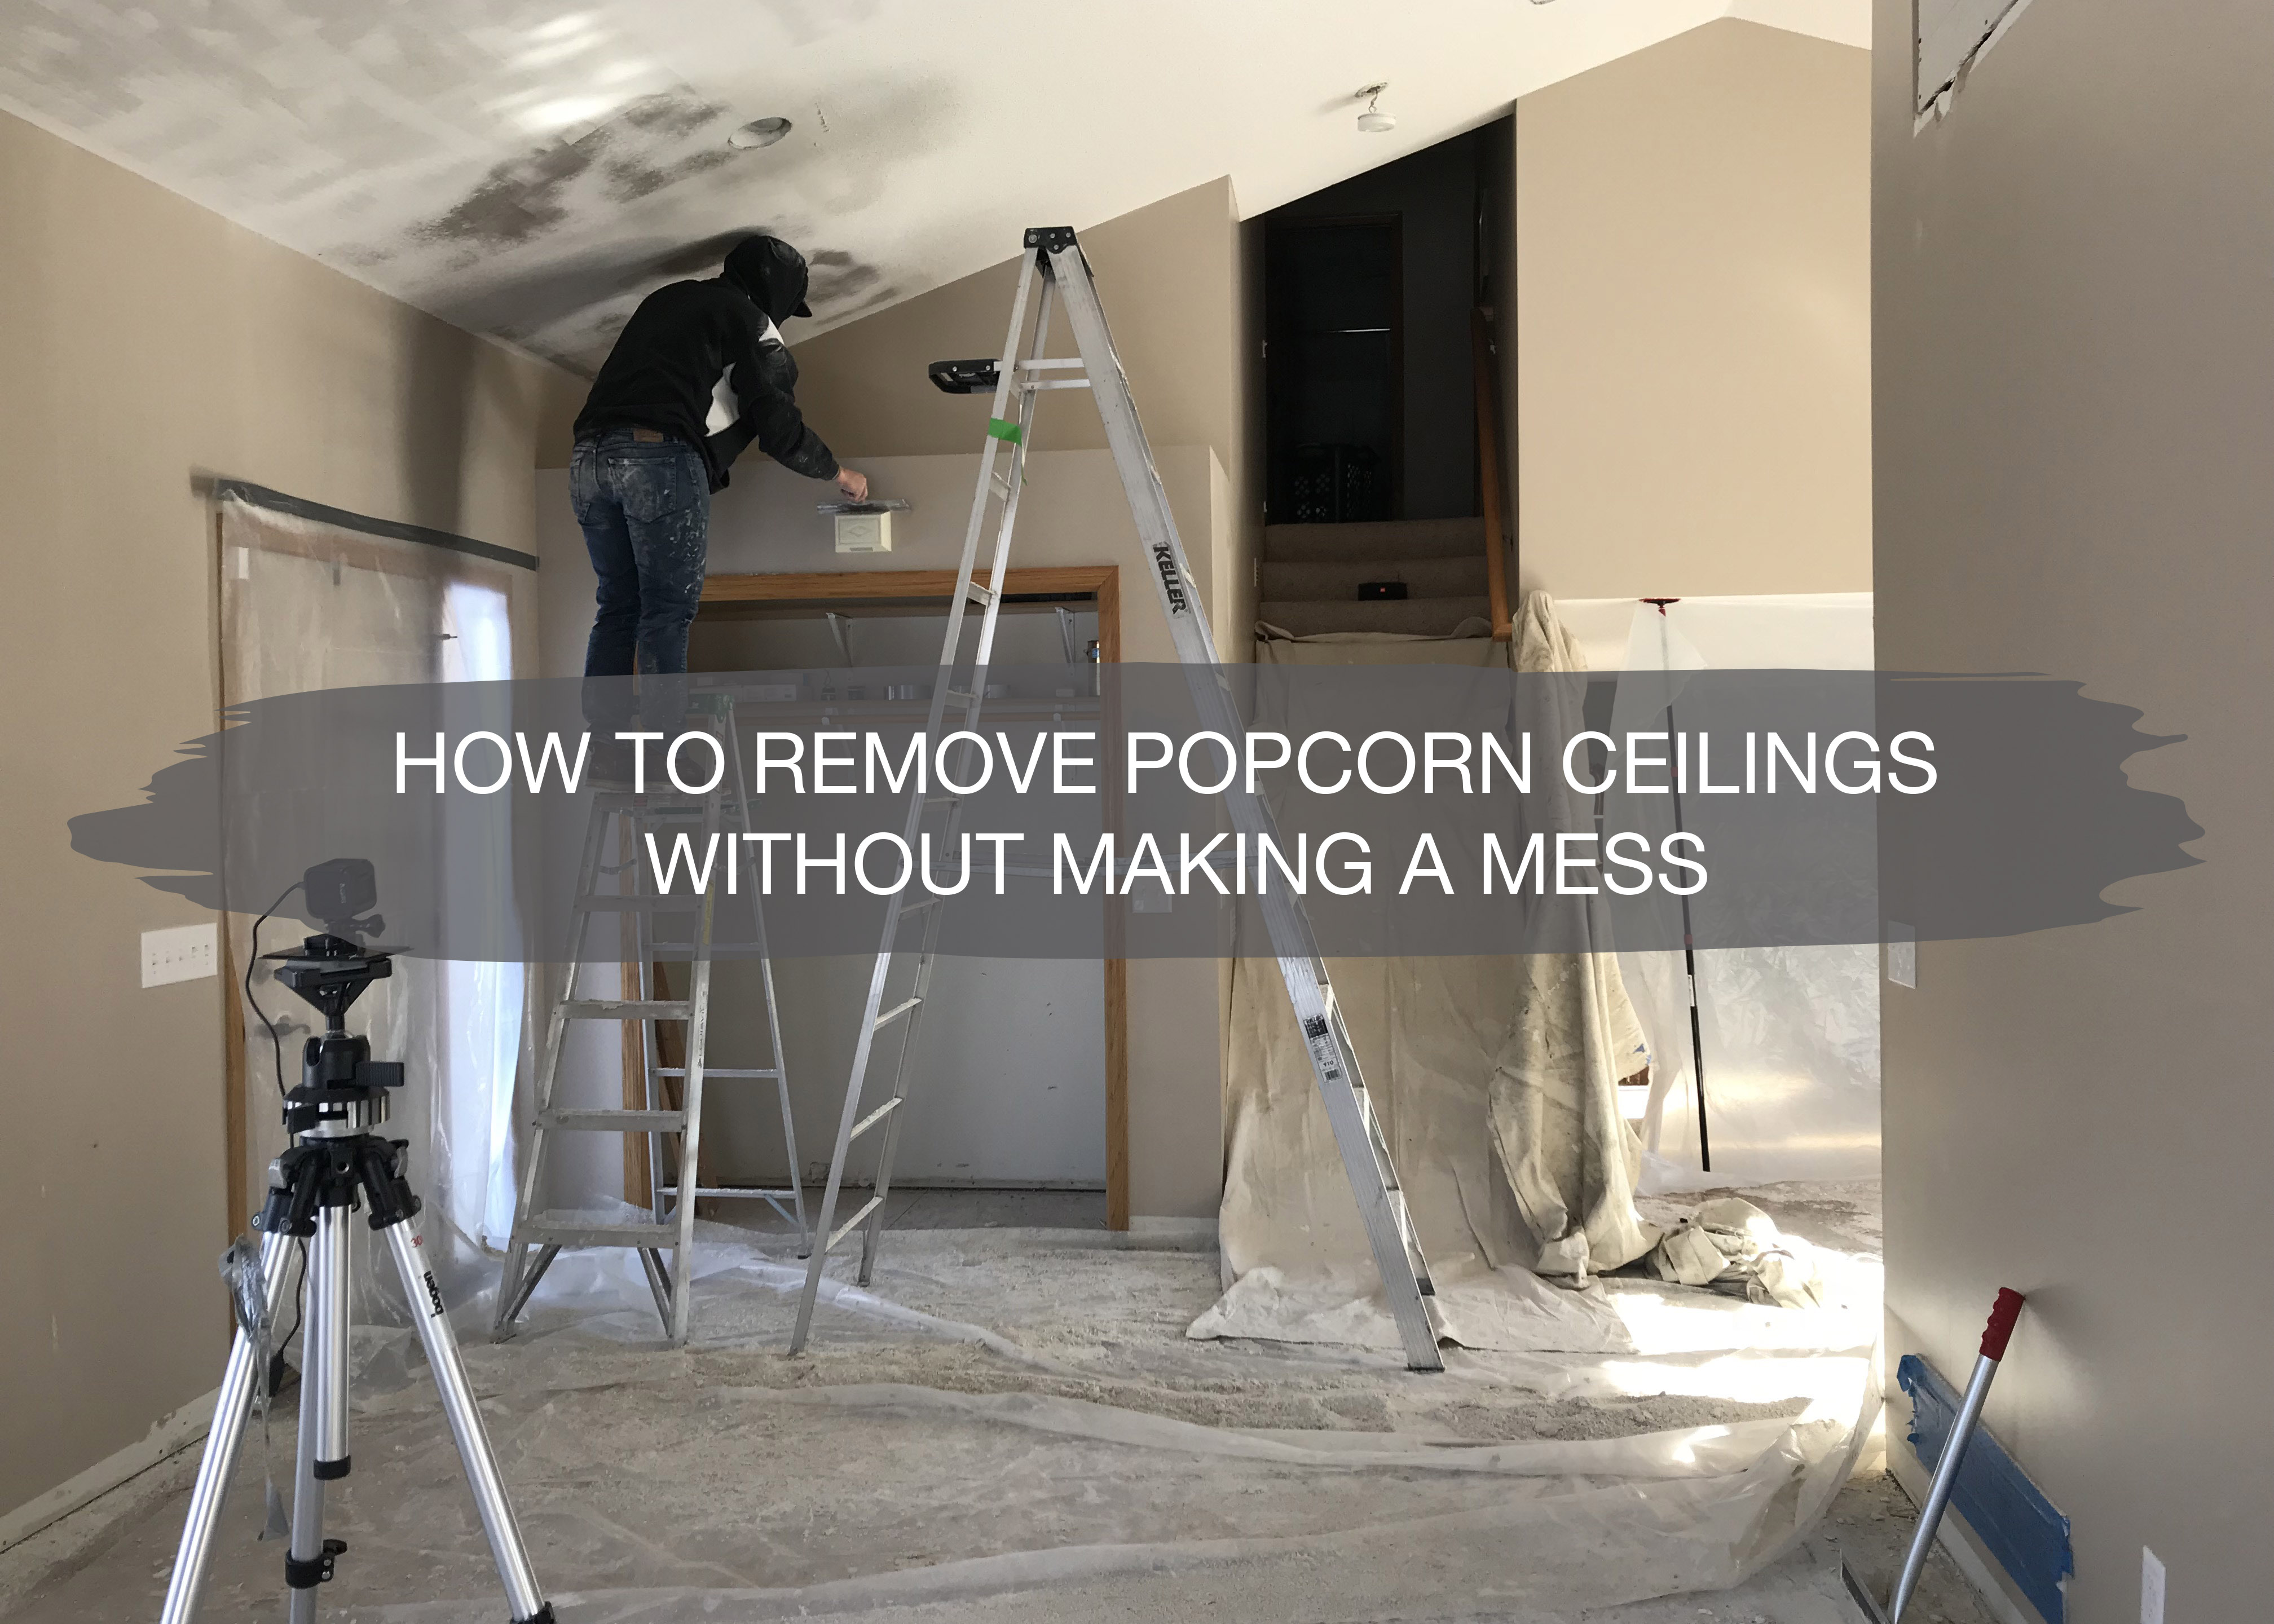 How To Remove Popcorn Ceilings | 6 Easy Steps And It's Gone